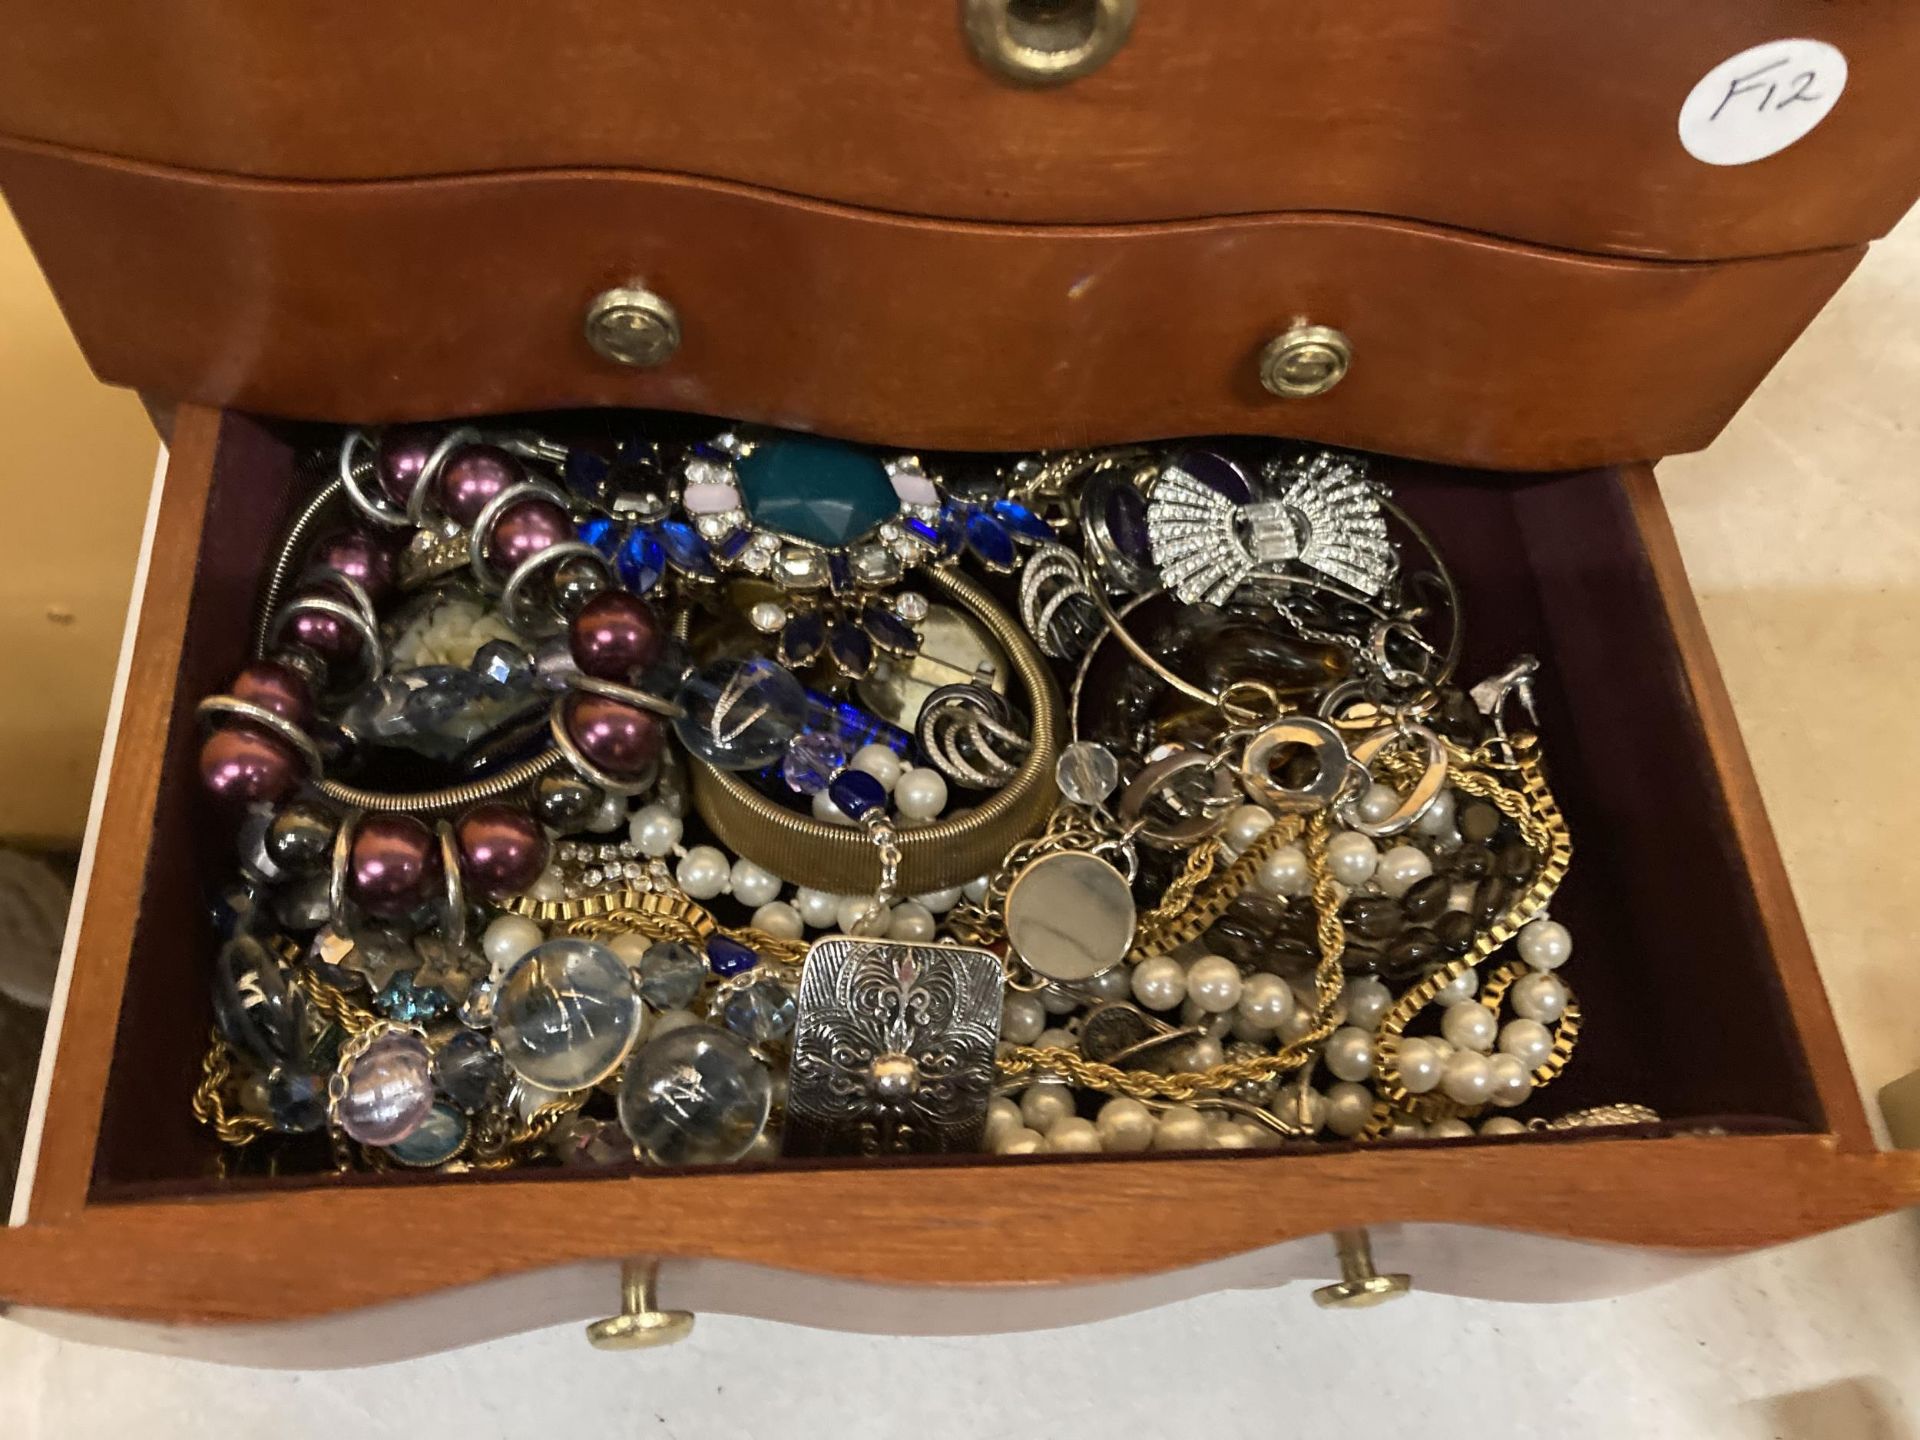 A THREE DRAWER JEWELLERY CHEST WITH HINGED TOP, MIRROR AND COSTUME JEWELLERY CONTENTS - Image 4 of 5